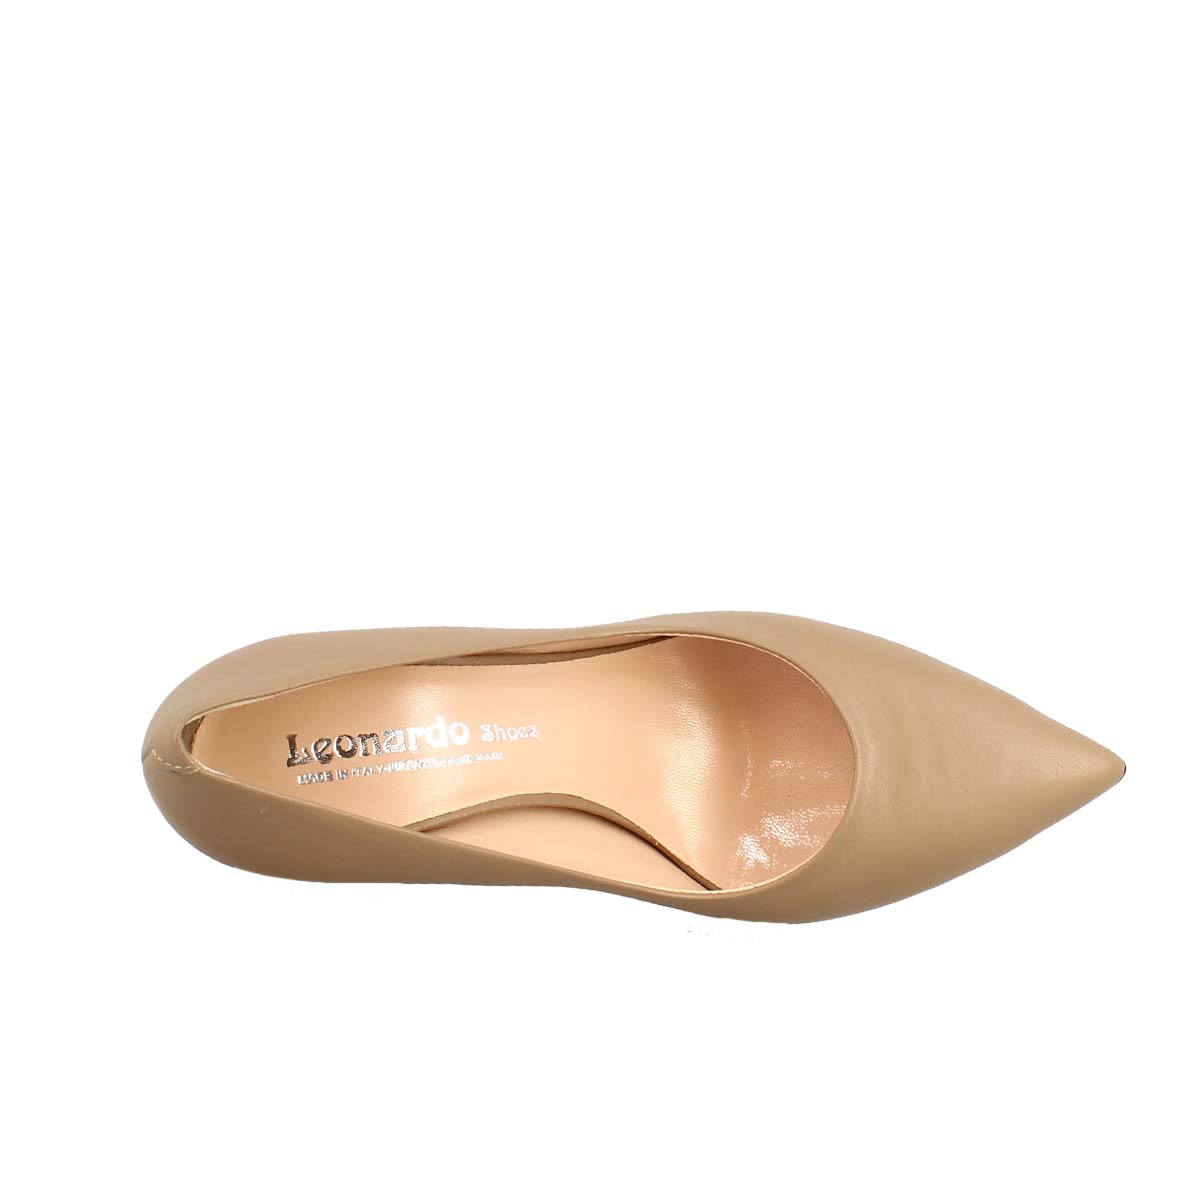 Pointed toe décolleté in walnut beige leather 